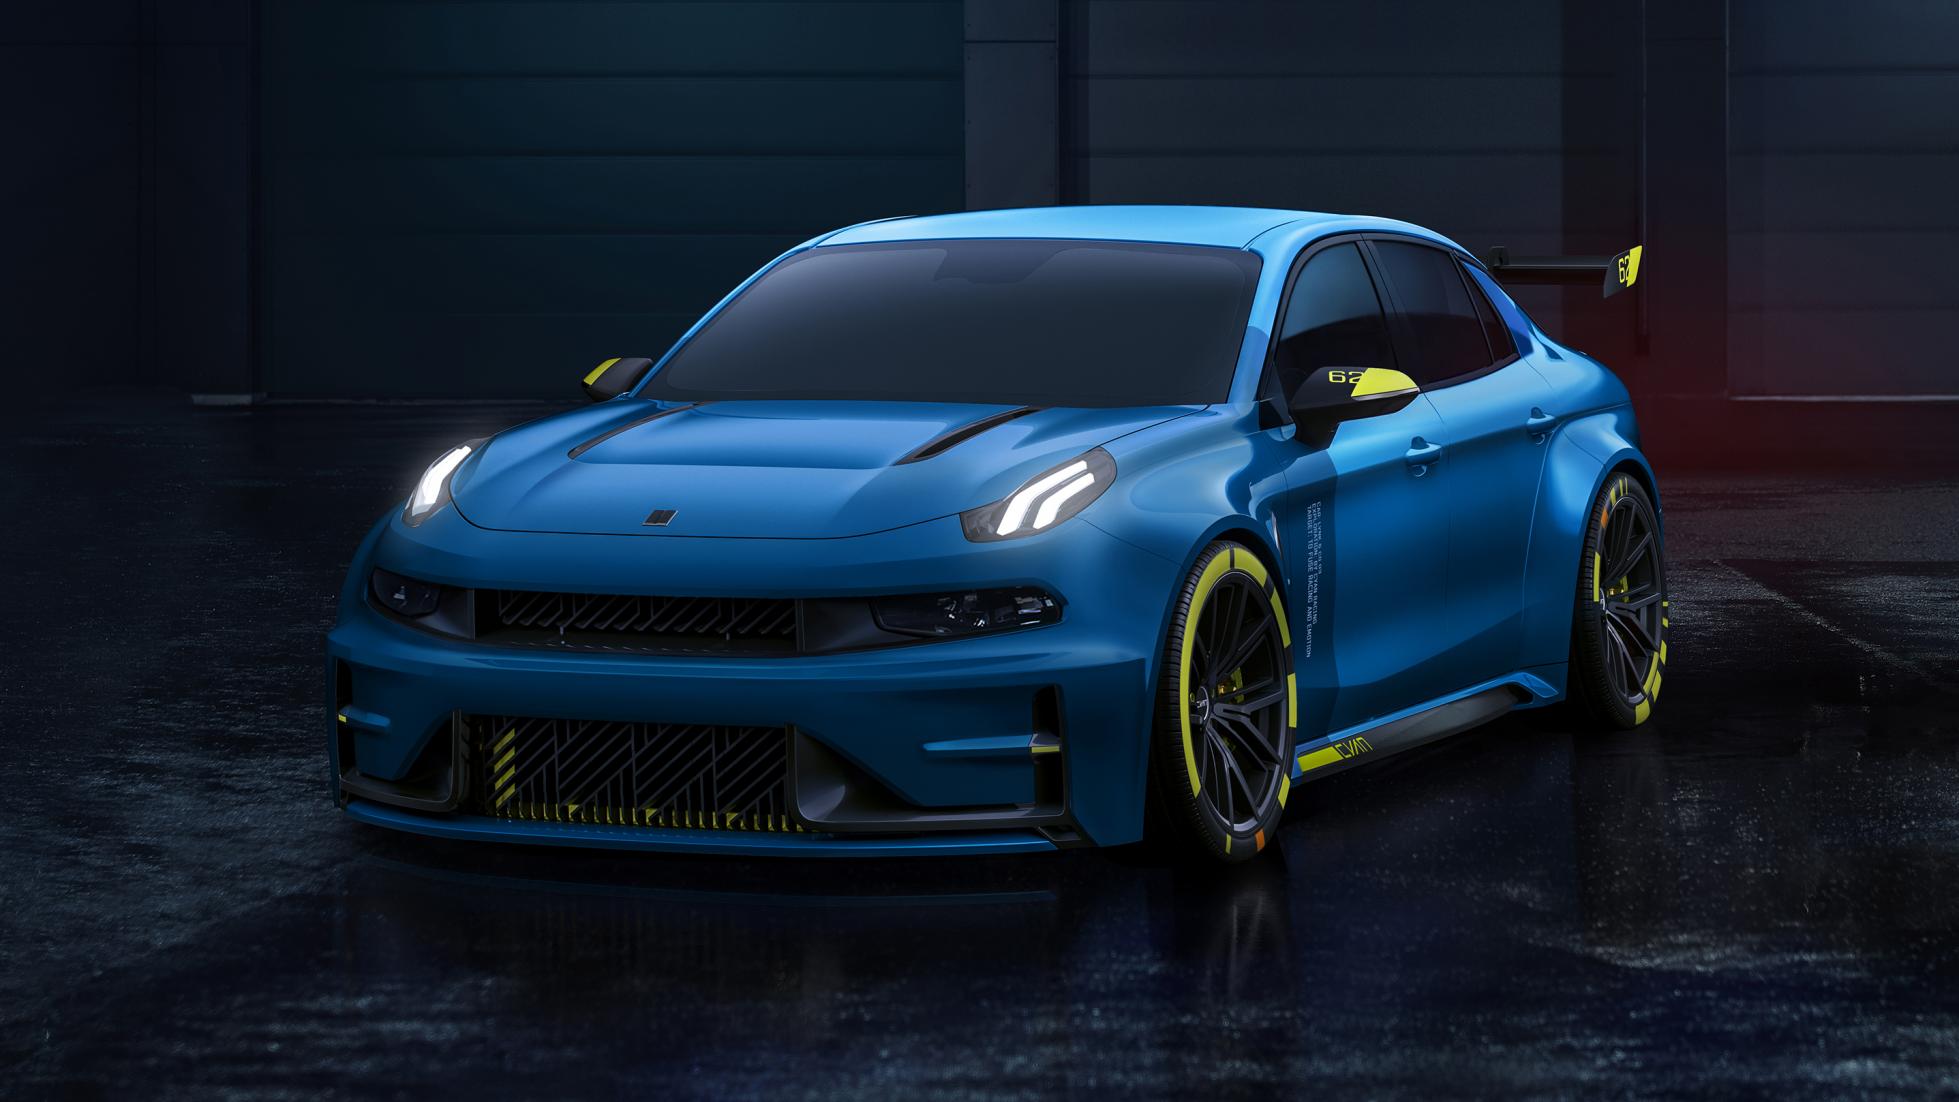 Lynk & Co will Enter FIA World Touring Series with this 500hp TCR Race Car 4